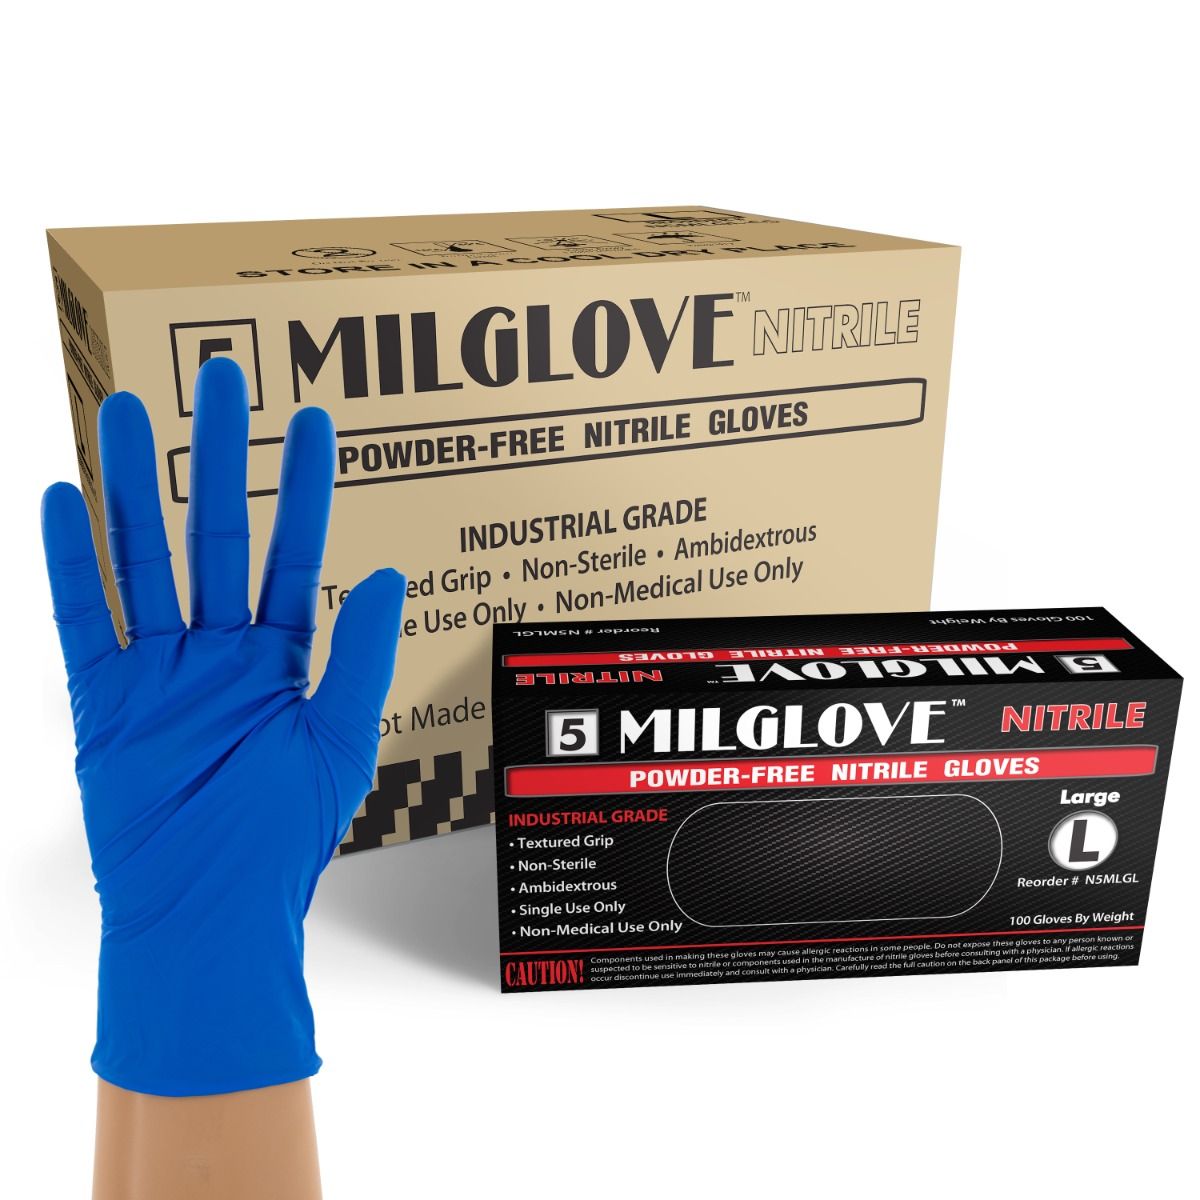 Salon World Safety Black Nitrile Disposable Gloves 3 Boxes of 100 Size Medium 50 Mil - Latex Free Textured Food Safe